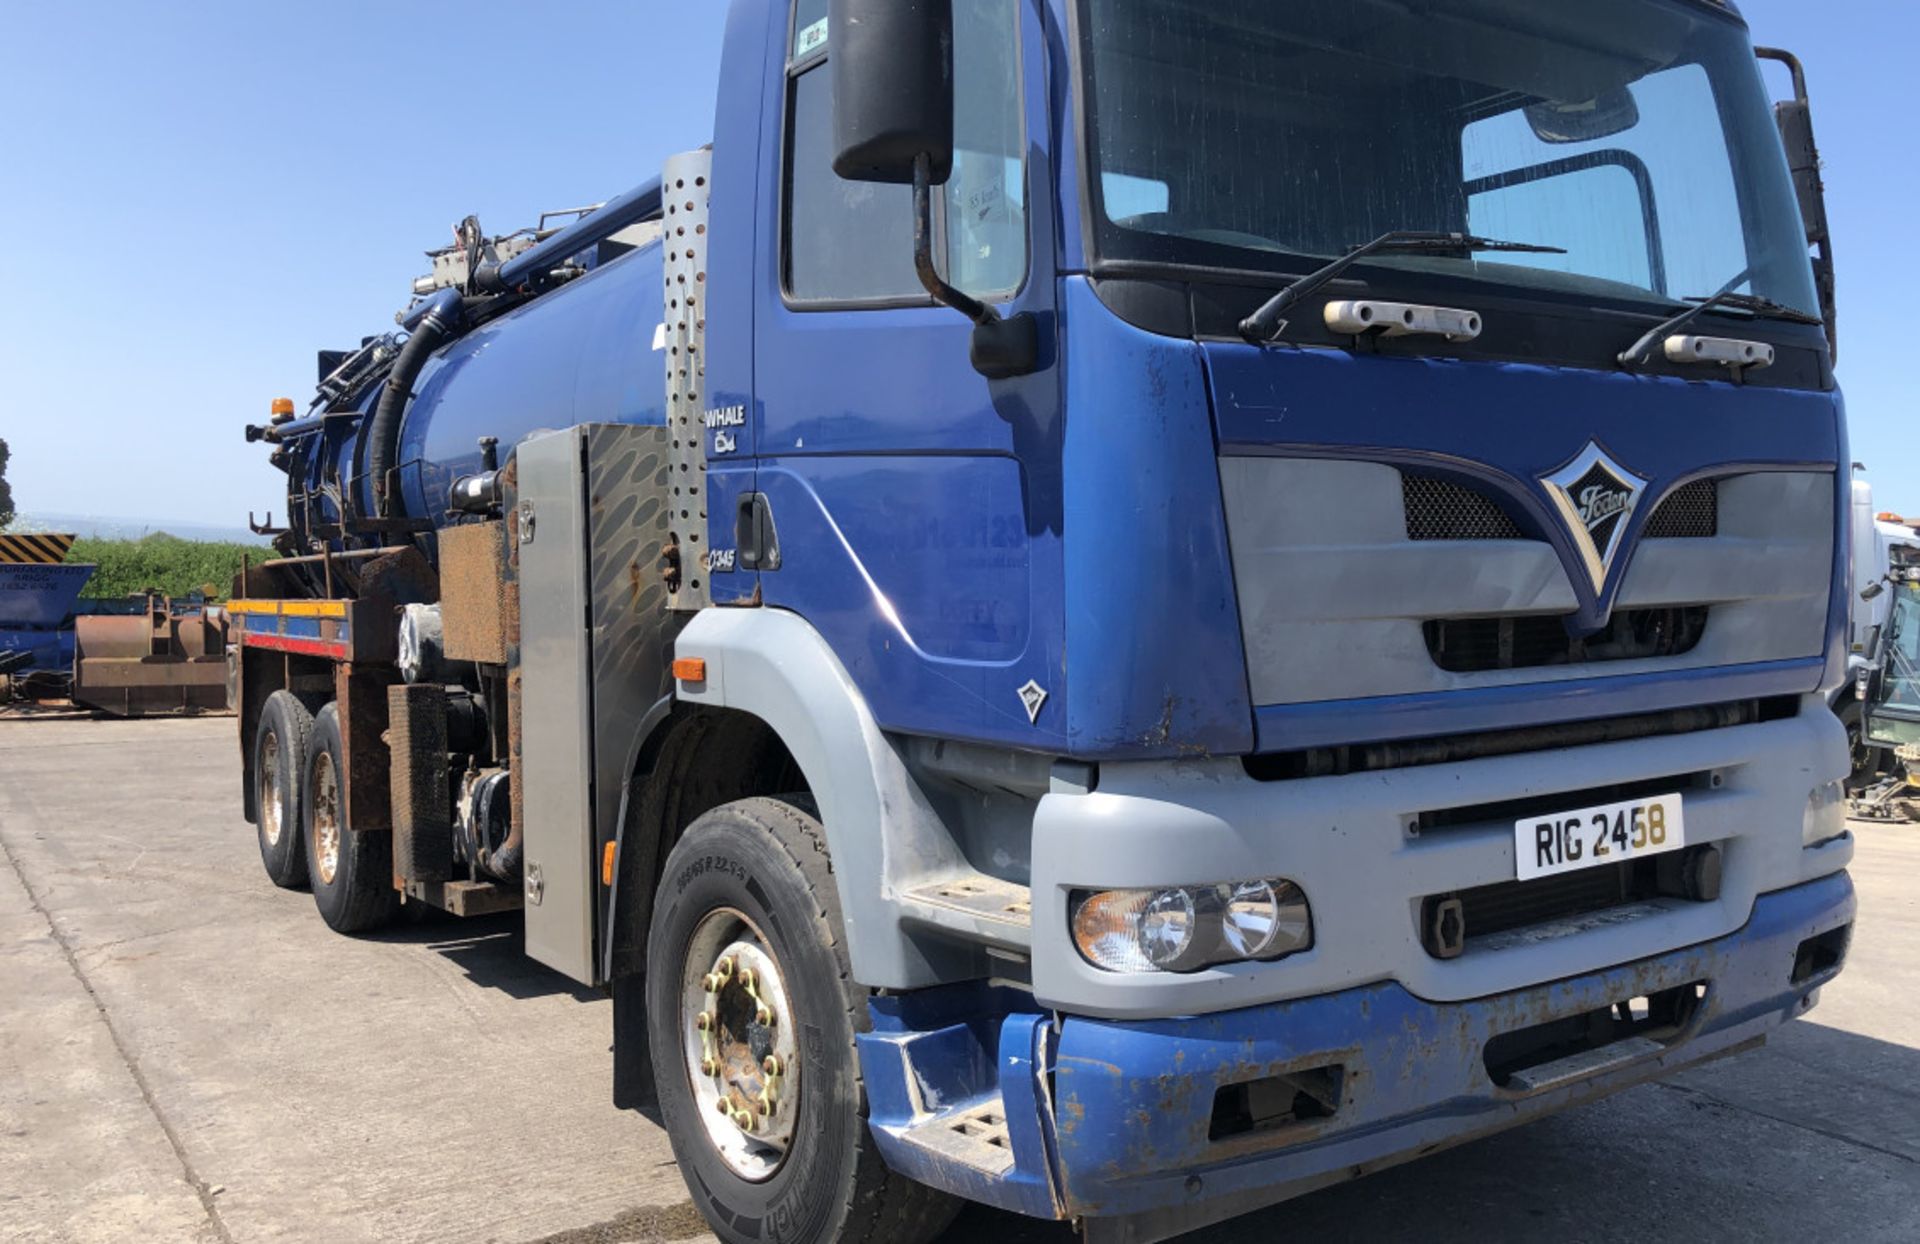 2005 FODEN 6×4 WHALE VACUUM TANKER - Image 2 of 9